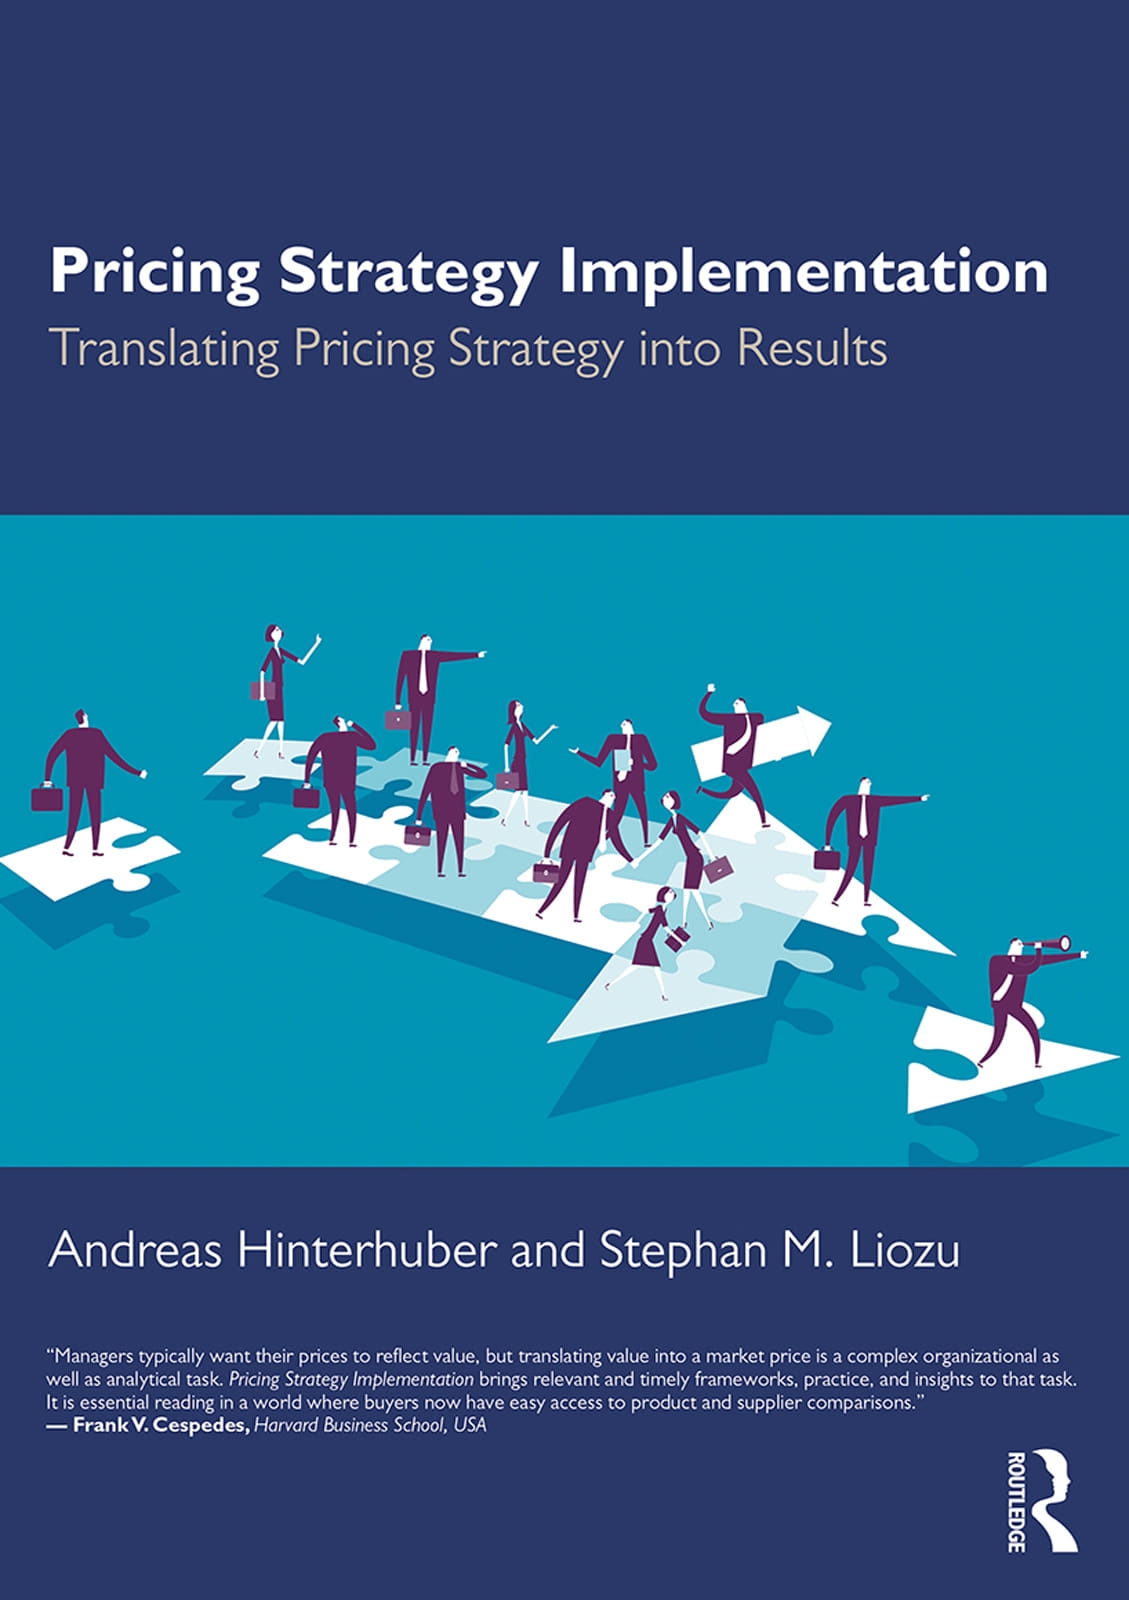 Pricing Strategy Implementation: Translating Pricing Strategy Into Results